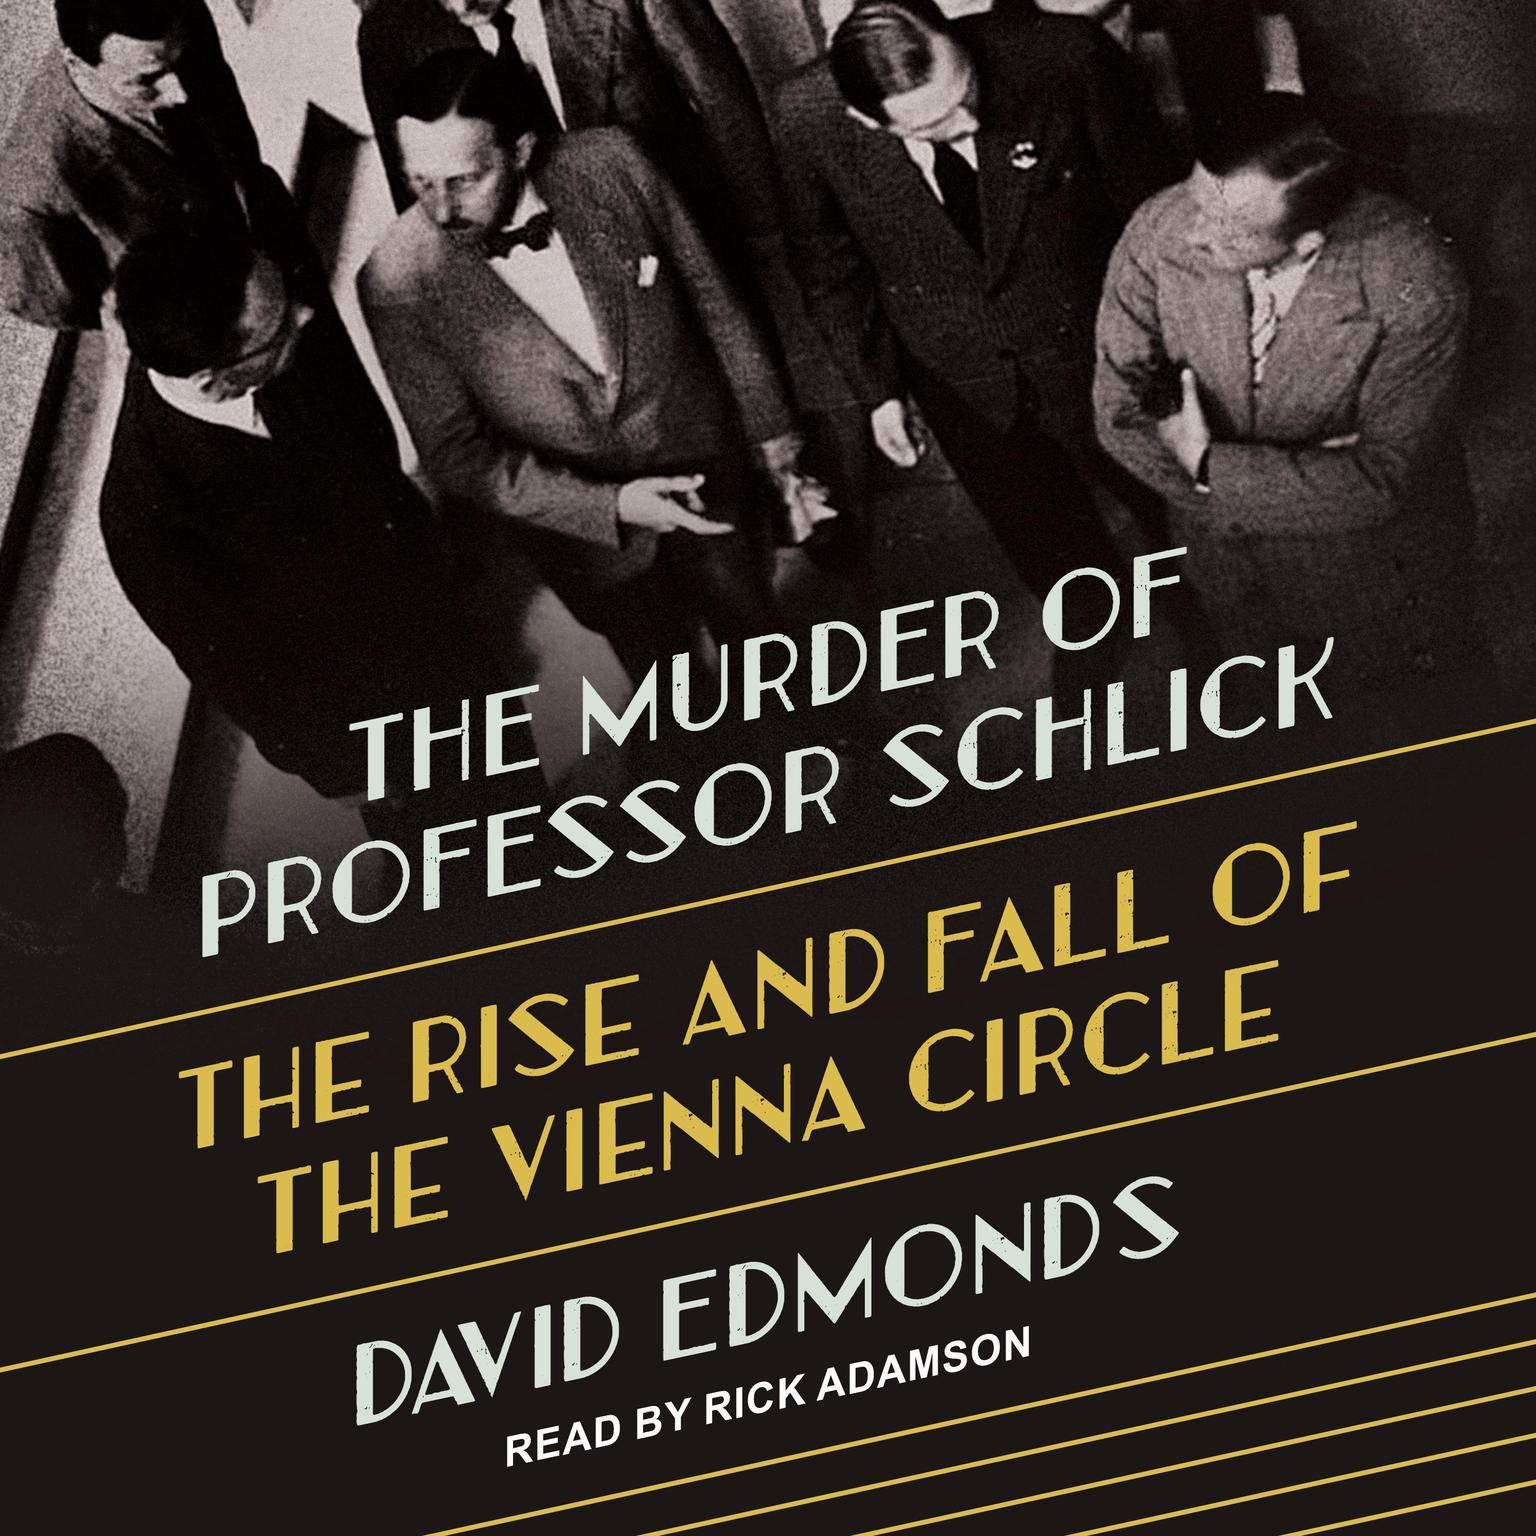 The Murder of Professor Schlick: The Rise and Fall of the Vienna Circle Audiobook, by David Edmonds